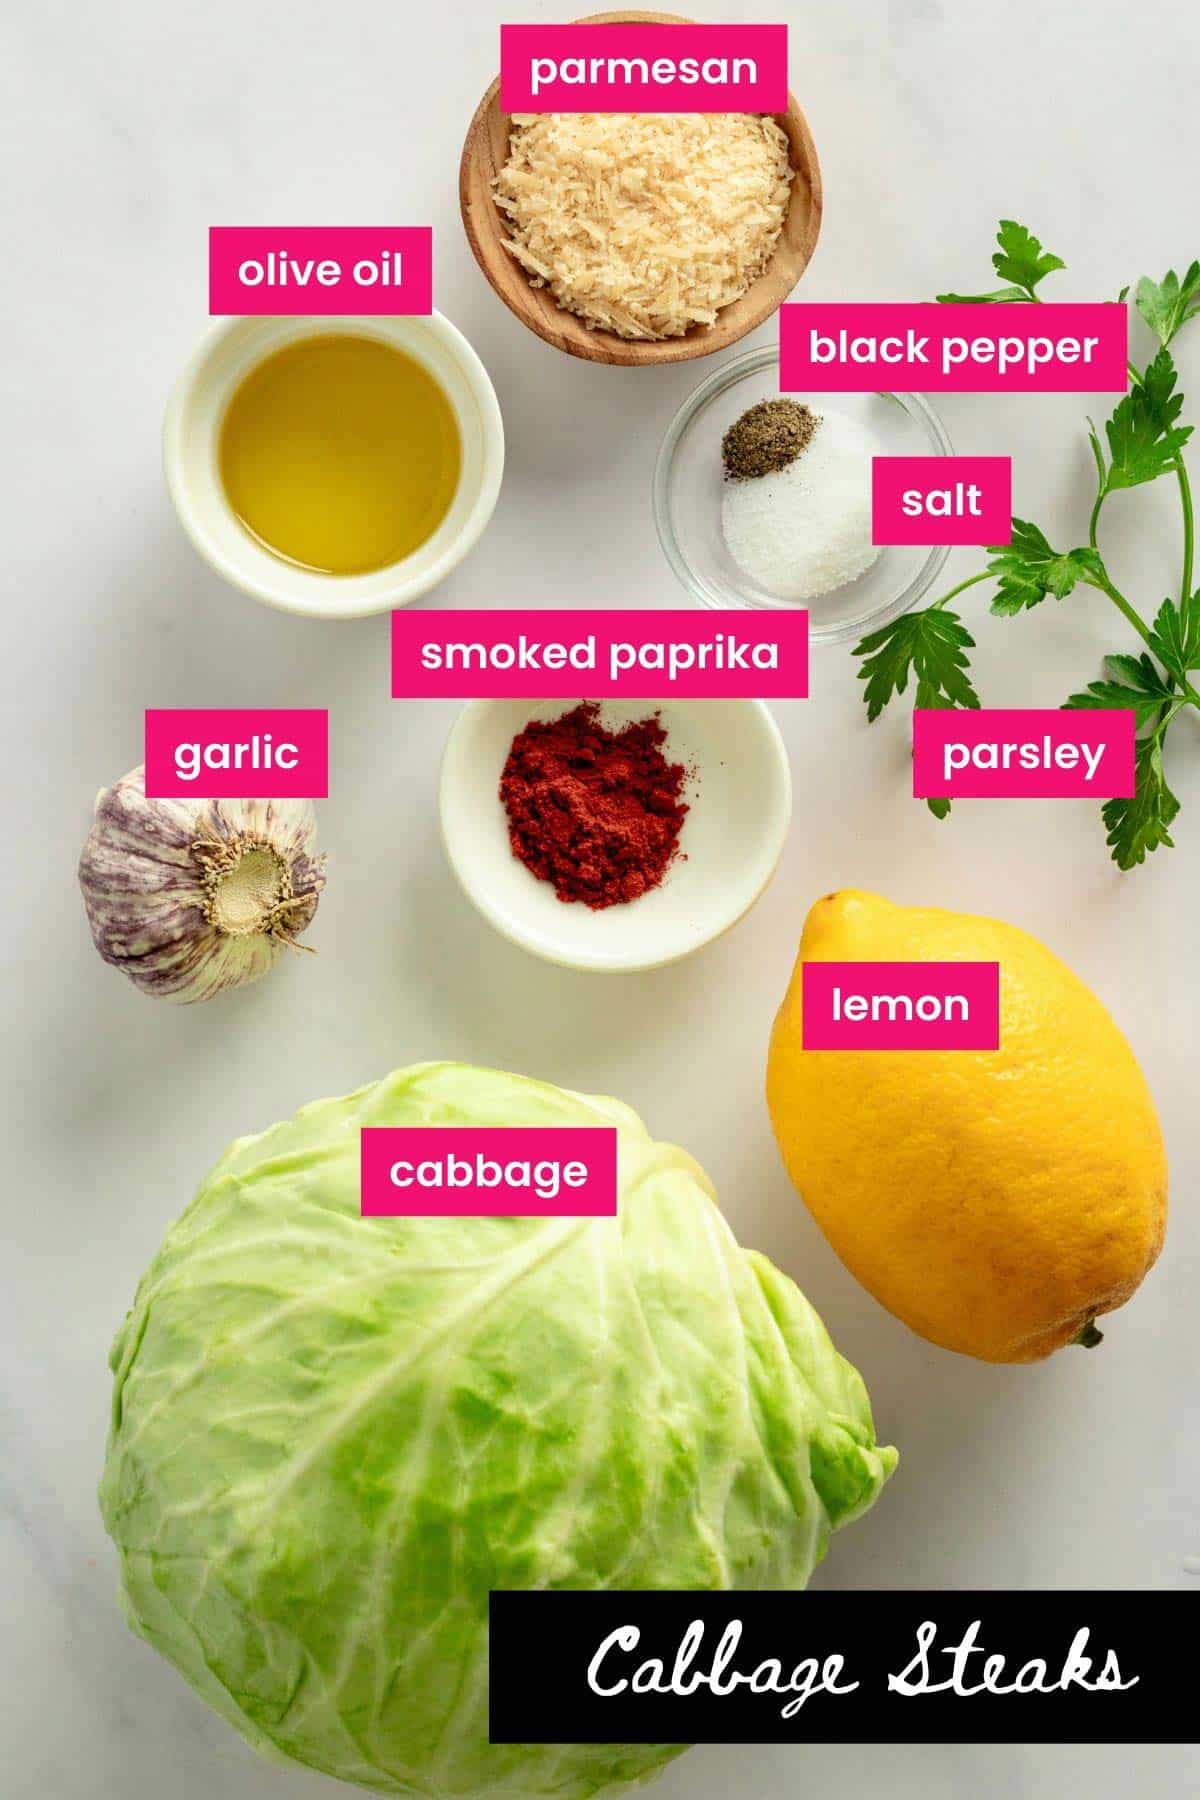 all ingredients for cabbage steaks